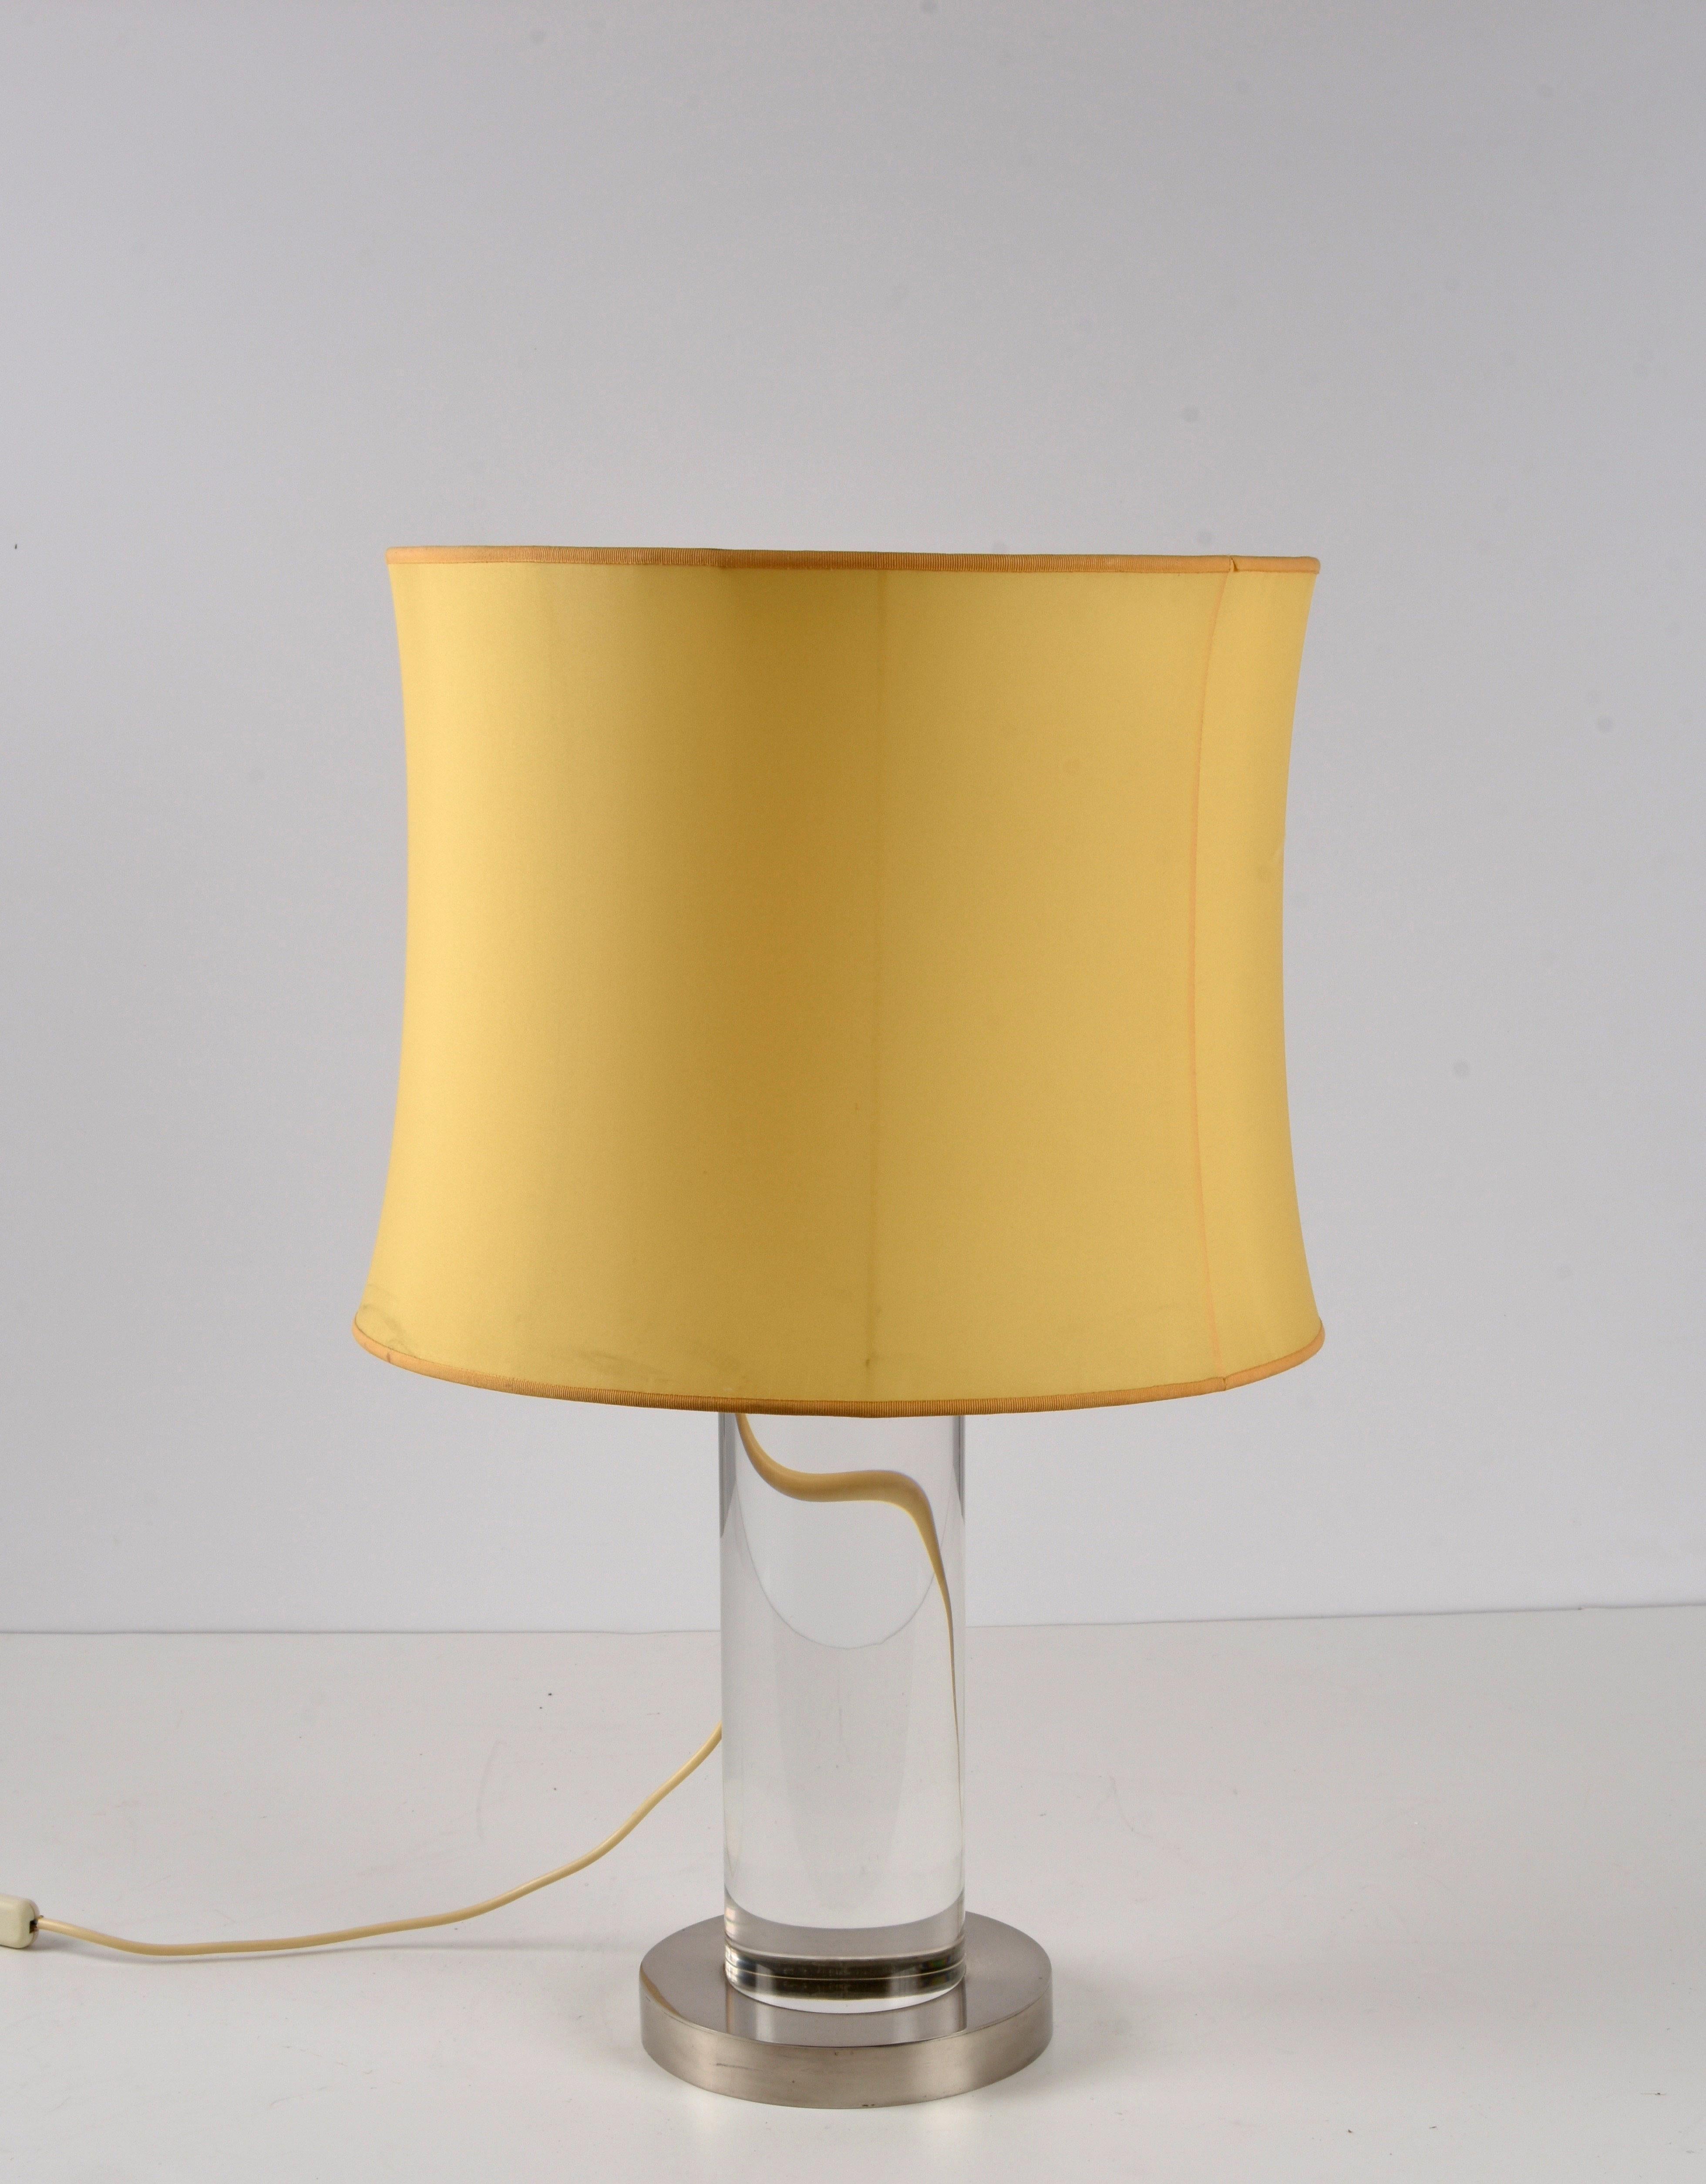 Amazing mid-century Lucite and brass table lamp. This fantastic piece was designed by Romeo Rega in Italy during the 1970s.

The imaginative cylindrical structure of this lamp comes with a lucite column and a solid brass base will surprise you